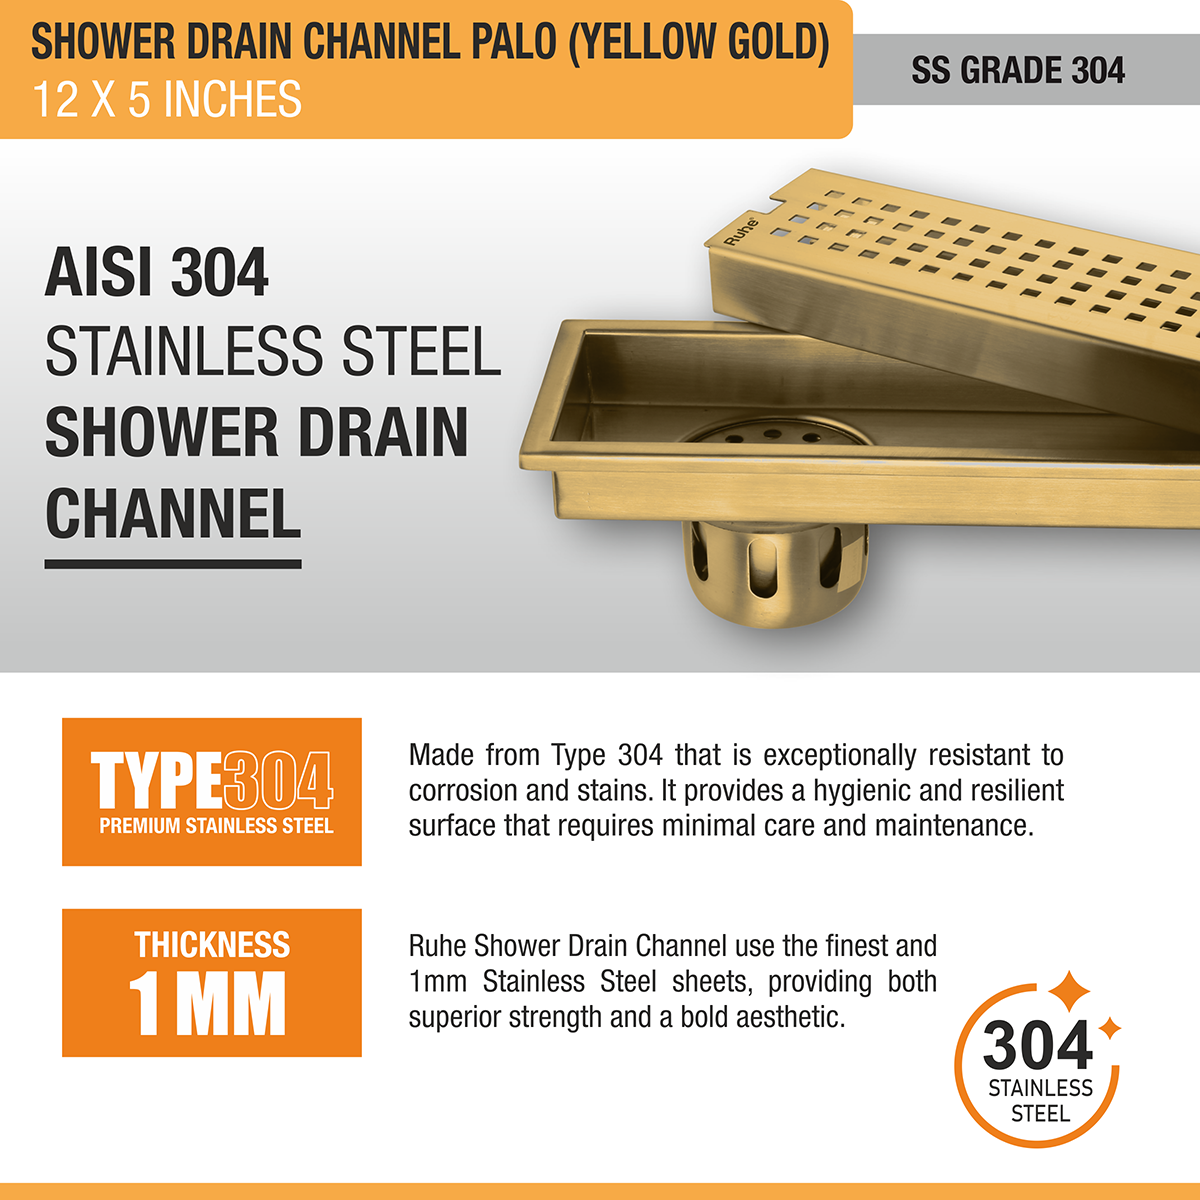 Palo Shower Drain Channel (12 x 5 Inches) YELLOW GOLD stainless steel